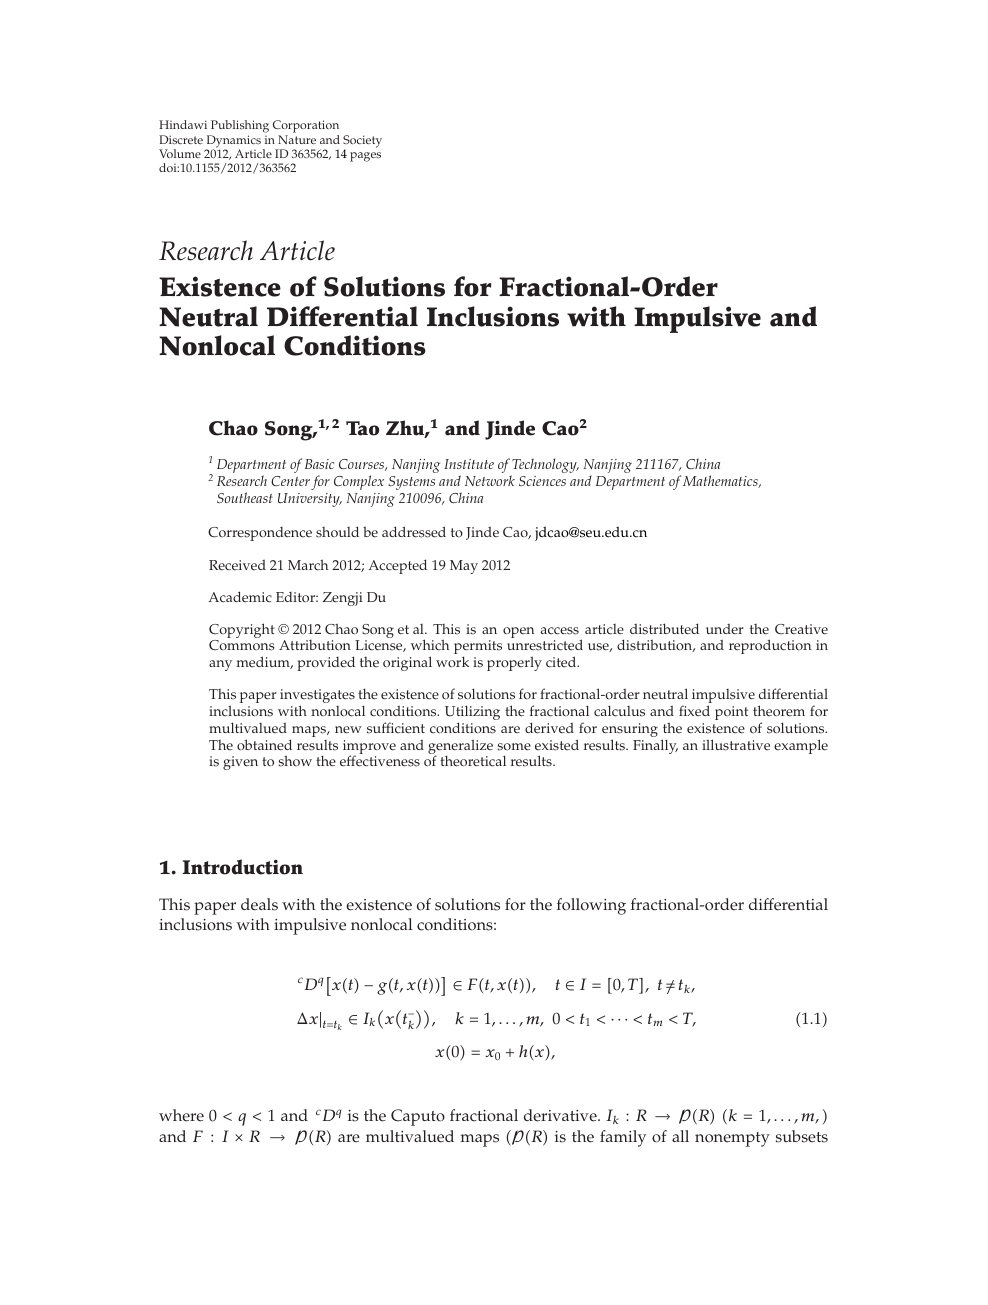 Existence Of Solutions For Fractional Order Neutral Differential Inclusions With Impulsive And Nonlocal Conditions Topic Of Research Paper In Mathematics Download Scholarly Article Pdf And Read For Free On Cyberleninka Open Science